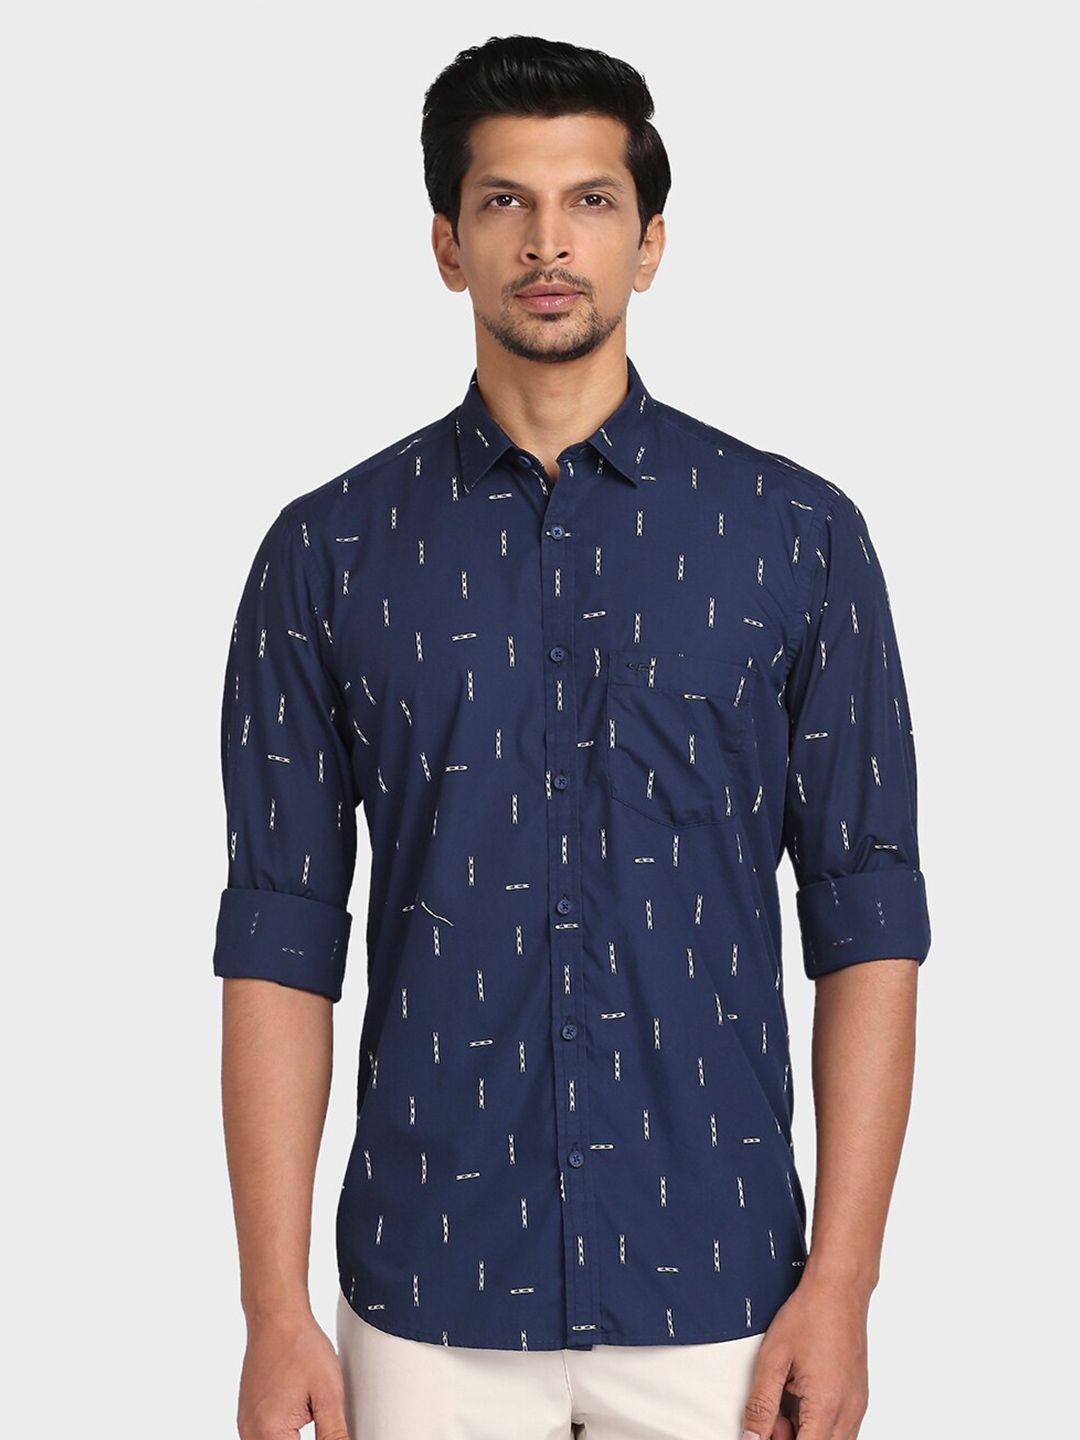 colorplus men blue tailored fit printed casual shirt